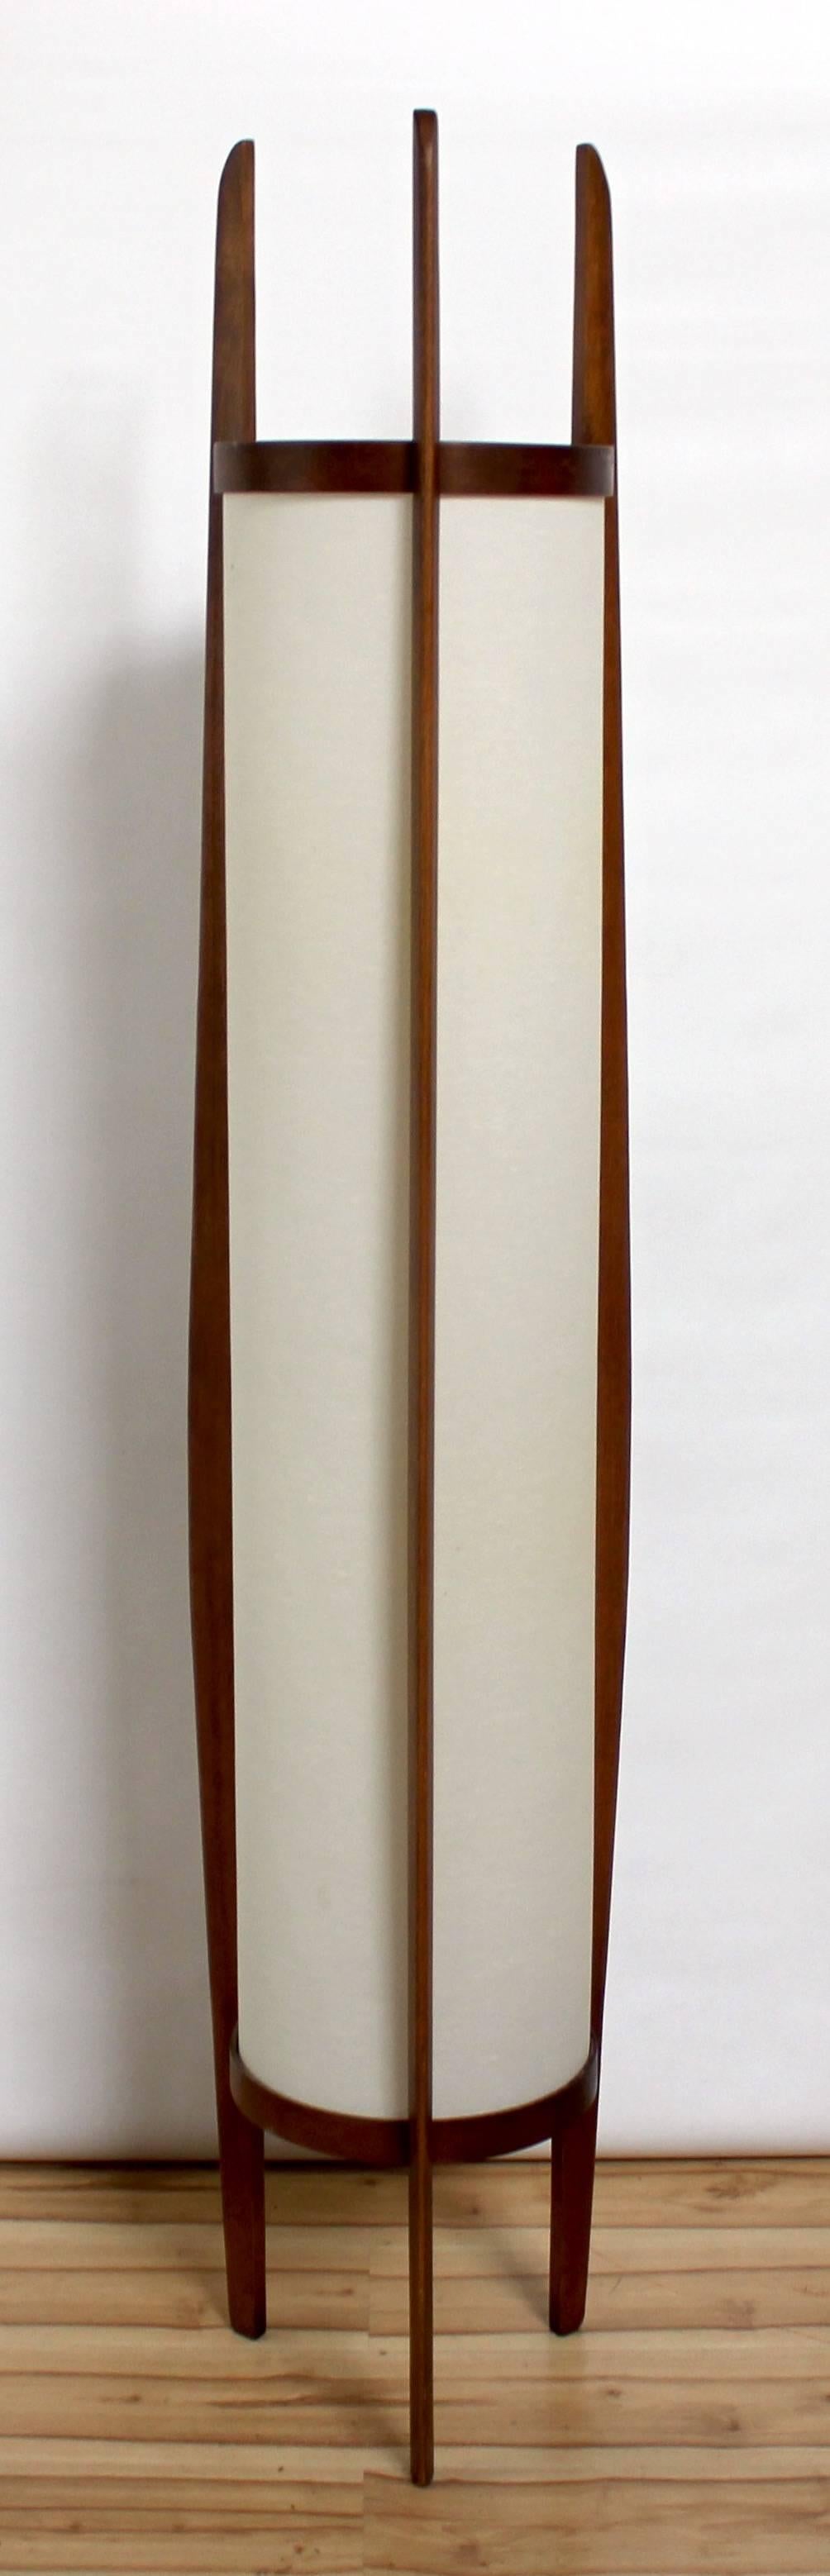 1960s Danish Modern sculptural teak floor lamp by Modeline with large linen drum shade. Lamp stands 6' tall and takes two light bulbs.